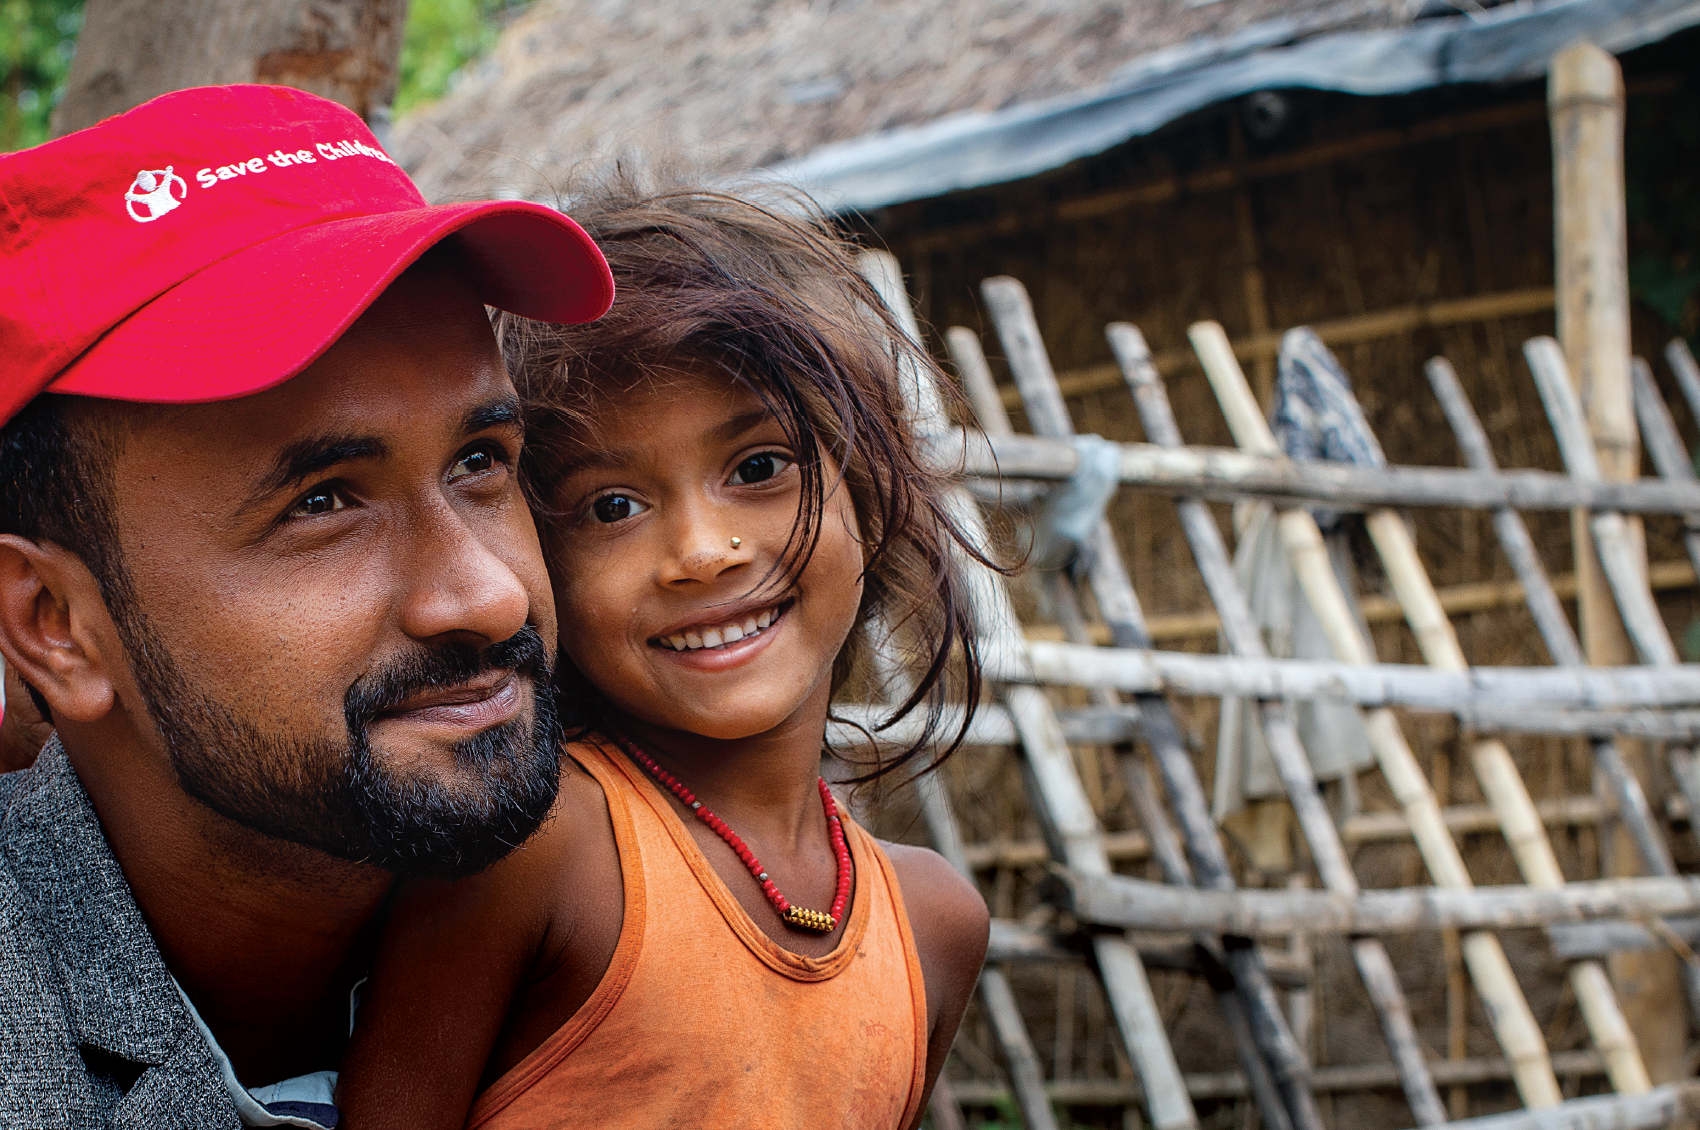 Nepal, a Save the Children worker smiles with a cute little girl in an orange shirt